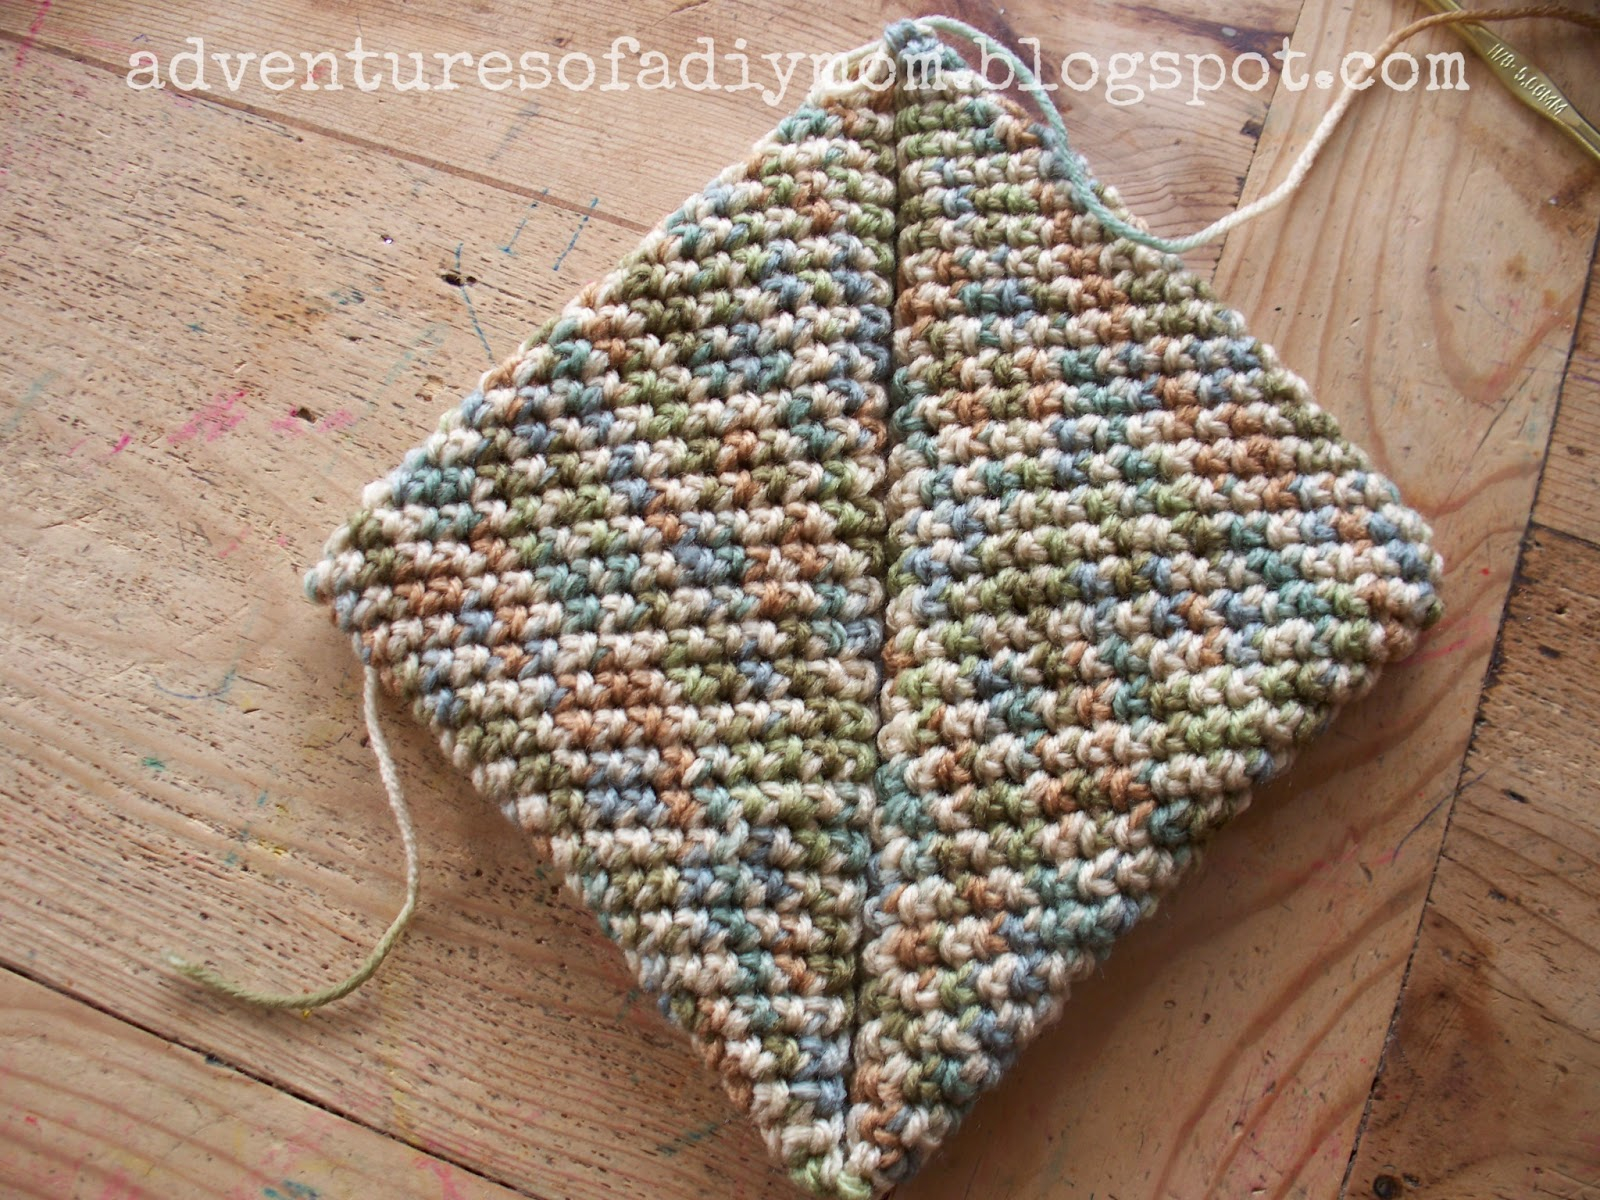 Free Crochet Hot Pad Patterns How To Crochet A Hotpad Super Easy Version Adventures Of A Diy Mom